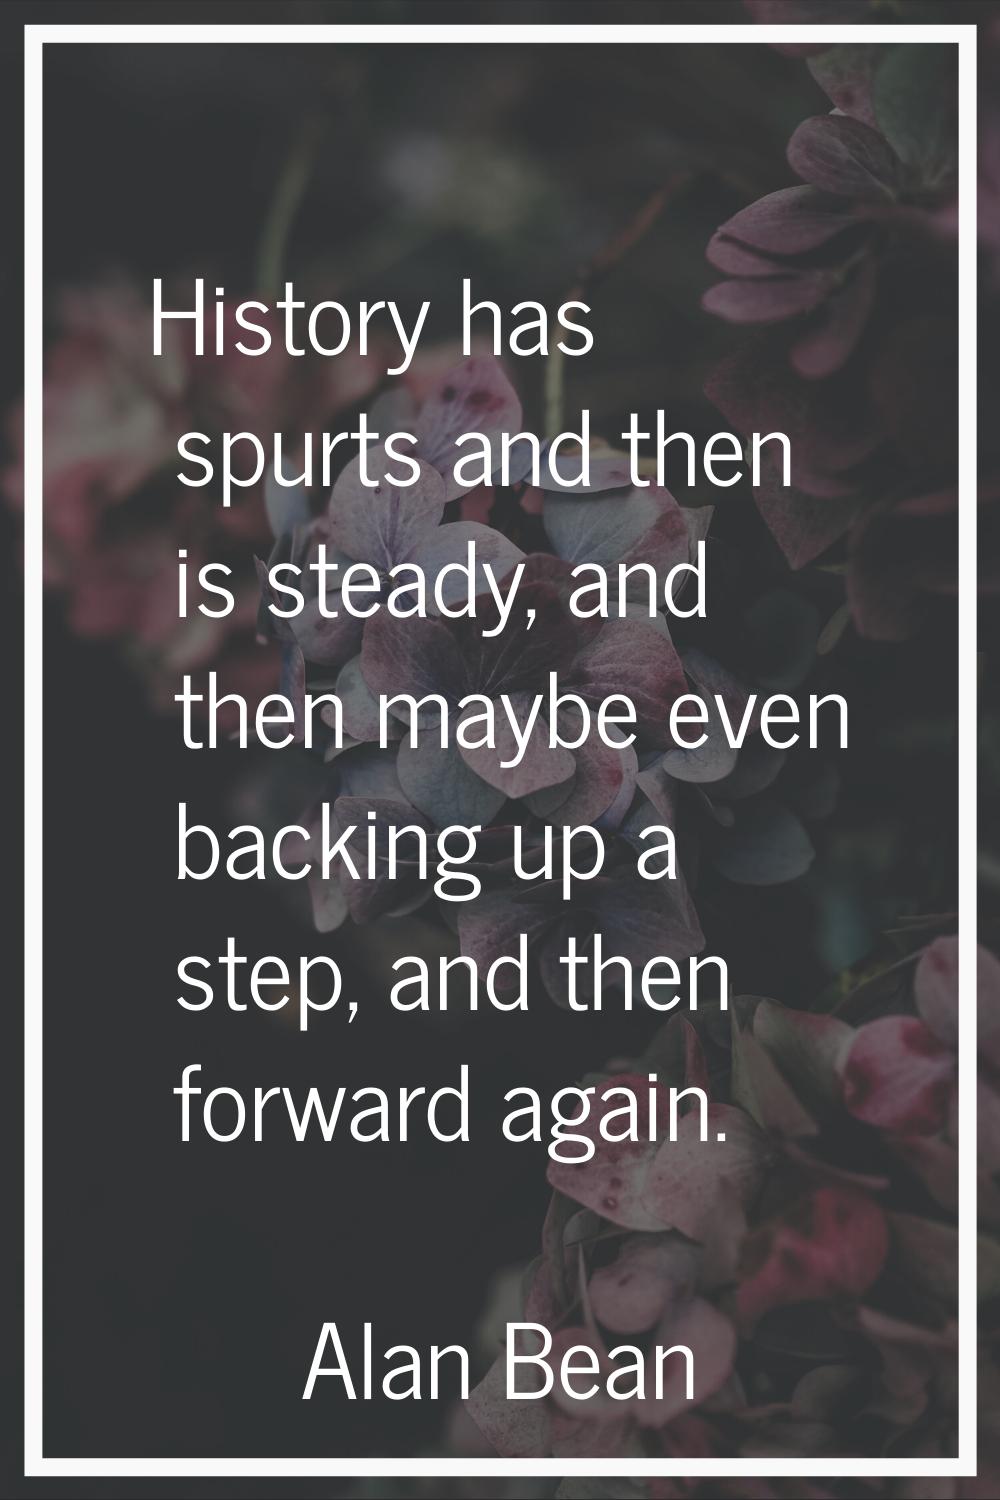 History has spurts and then is steady, and then maybe even backing up a step, and then forward agai